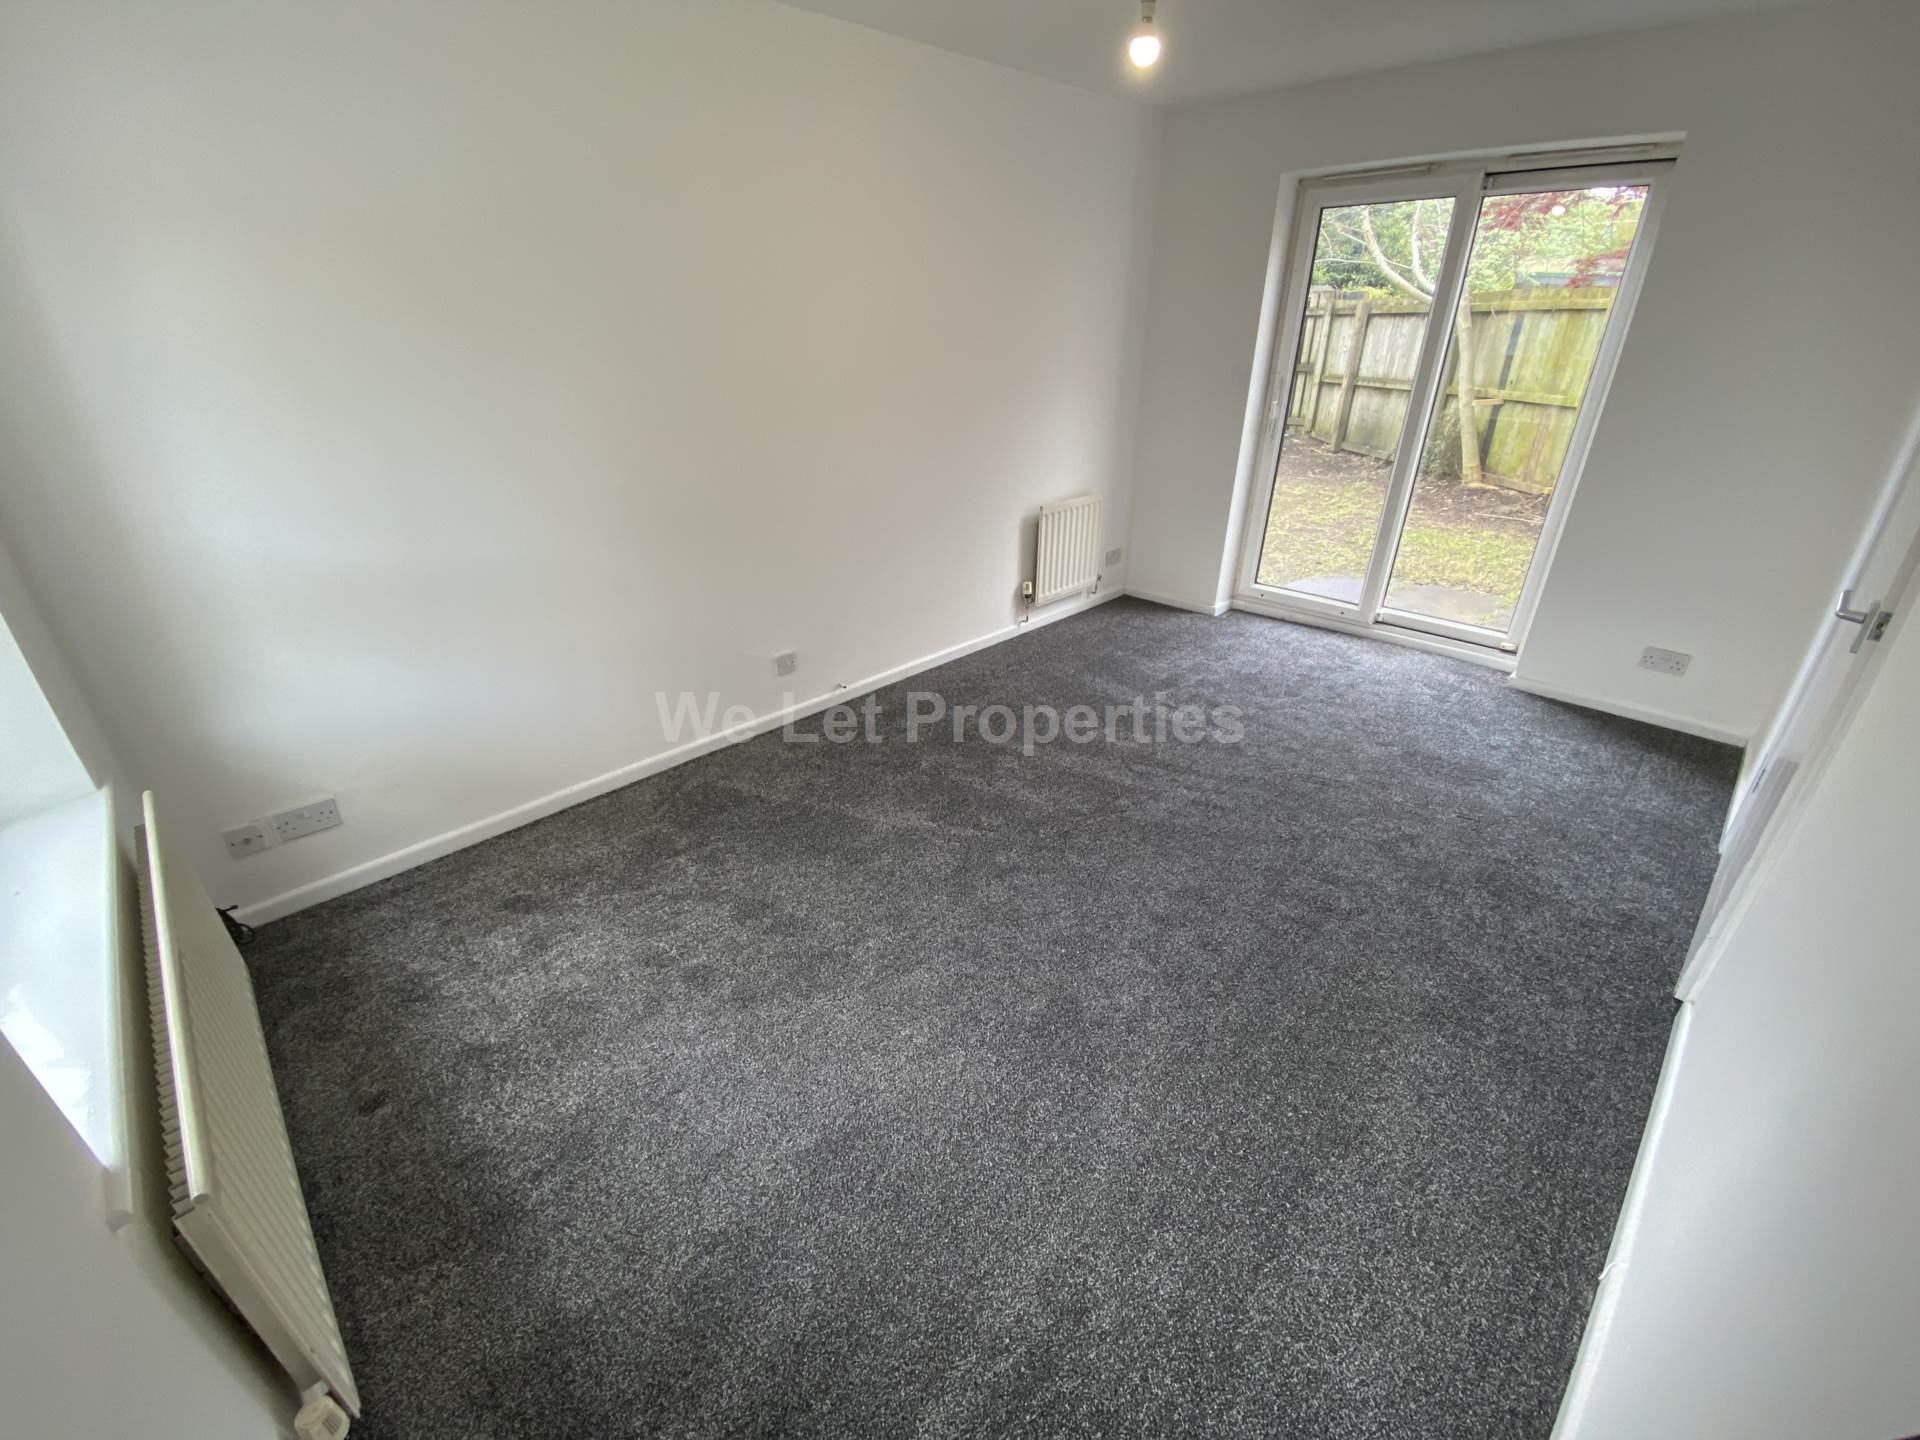 3 bed House (unspecified) for rent in Manchester. From We Let Properties - Manchester